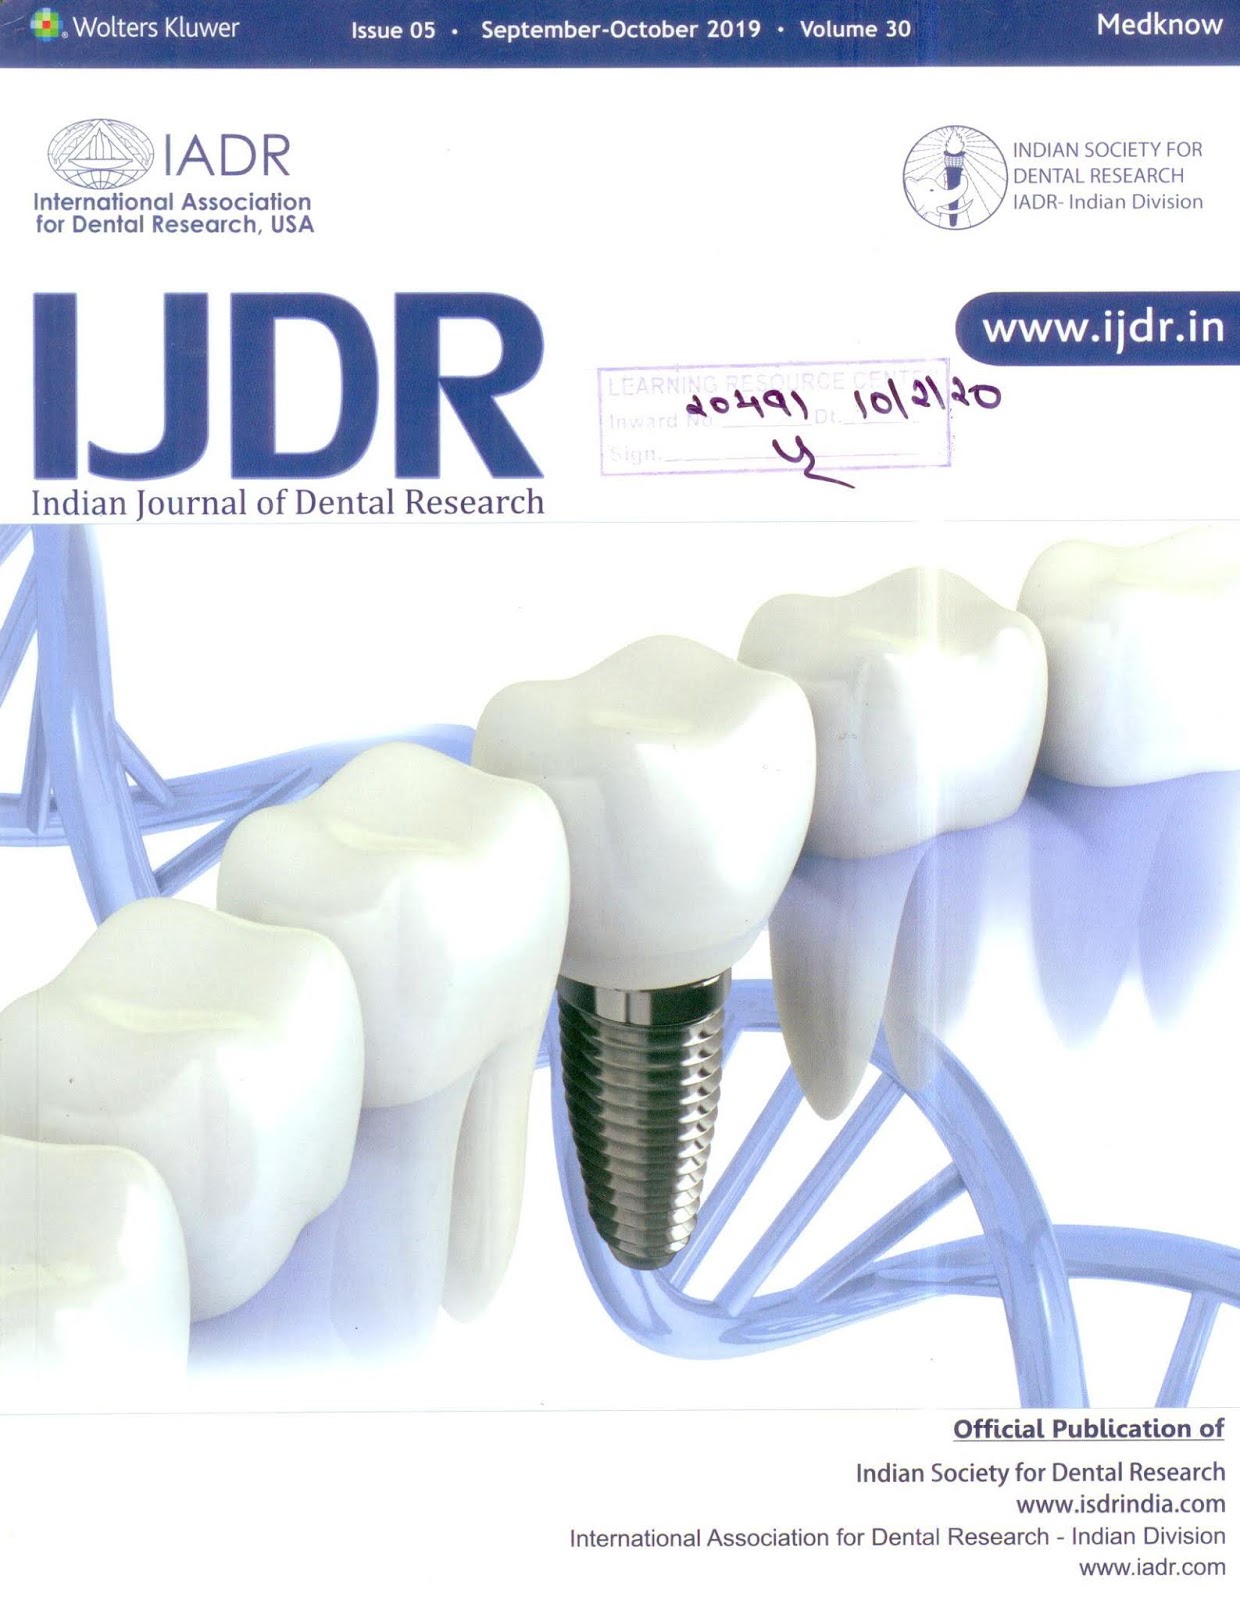 http://www.ijdr.in/showBackIssue.asp?issn=0970-9290;year=2019;volume=30;issue=5;month=September-October